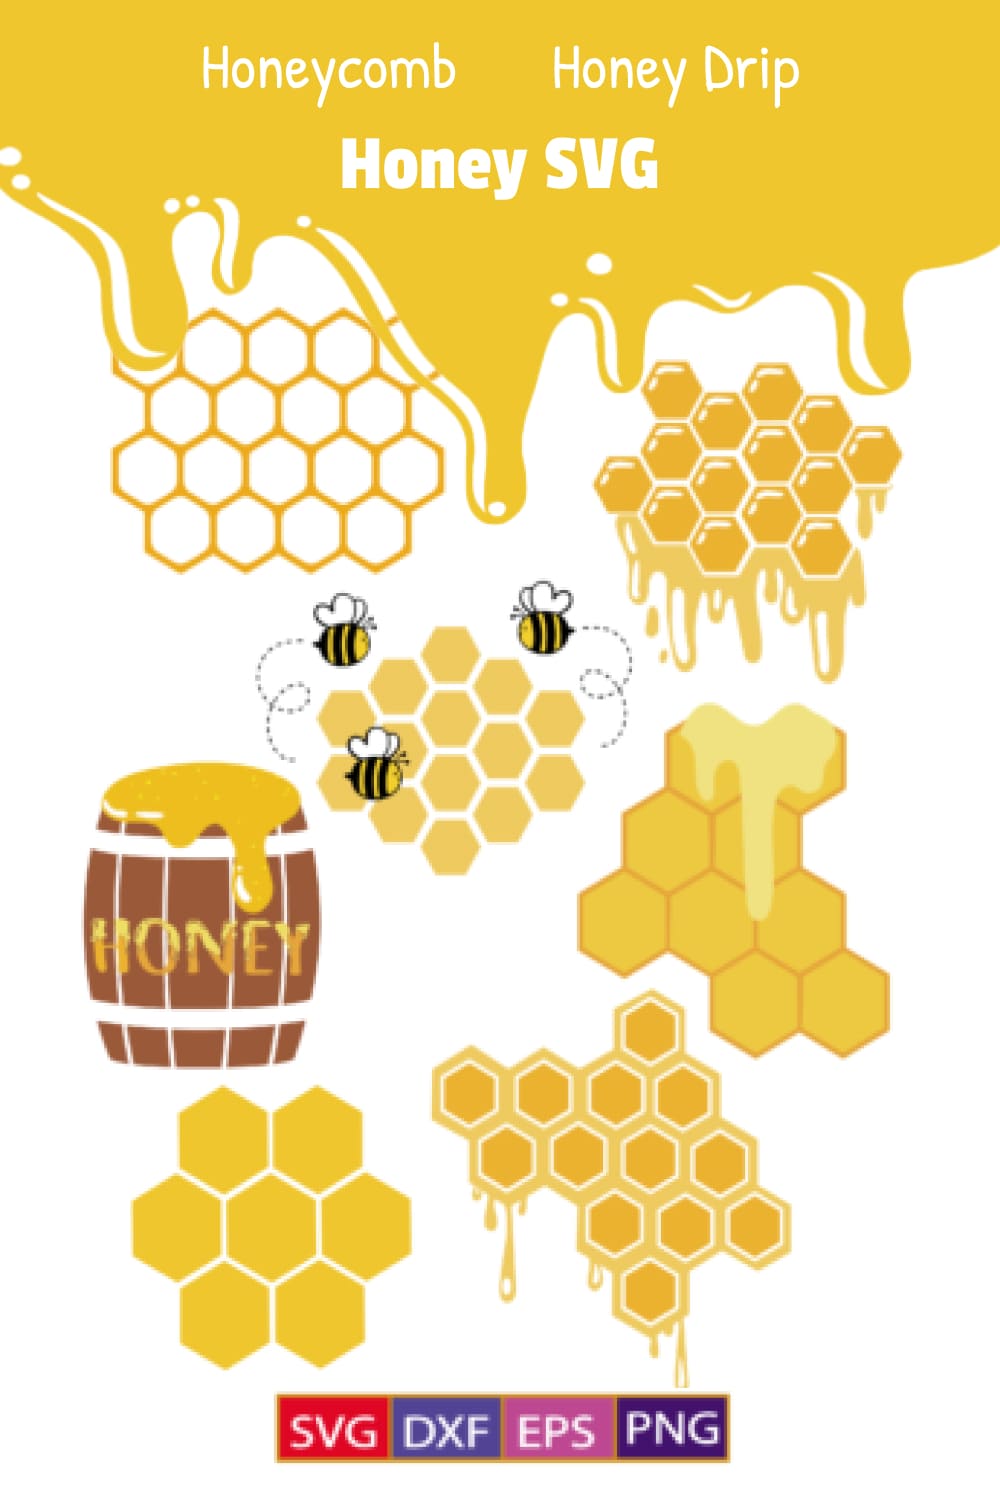 Bunch of bees and honeycombs on a white background.